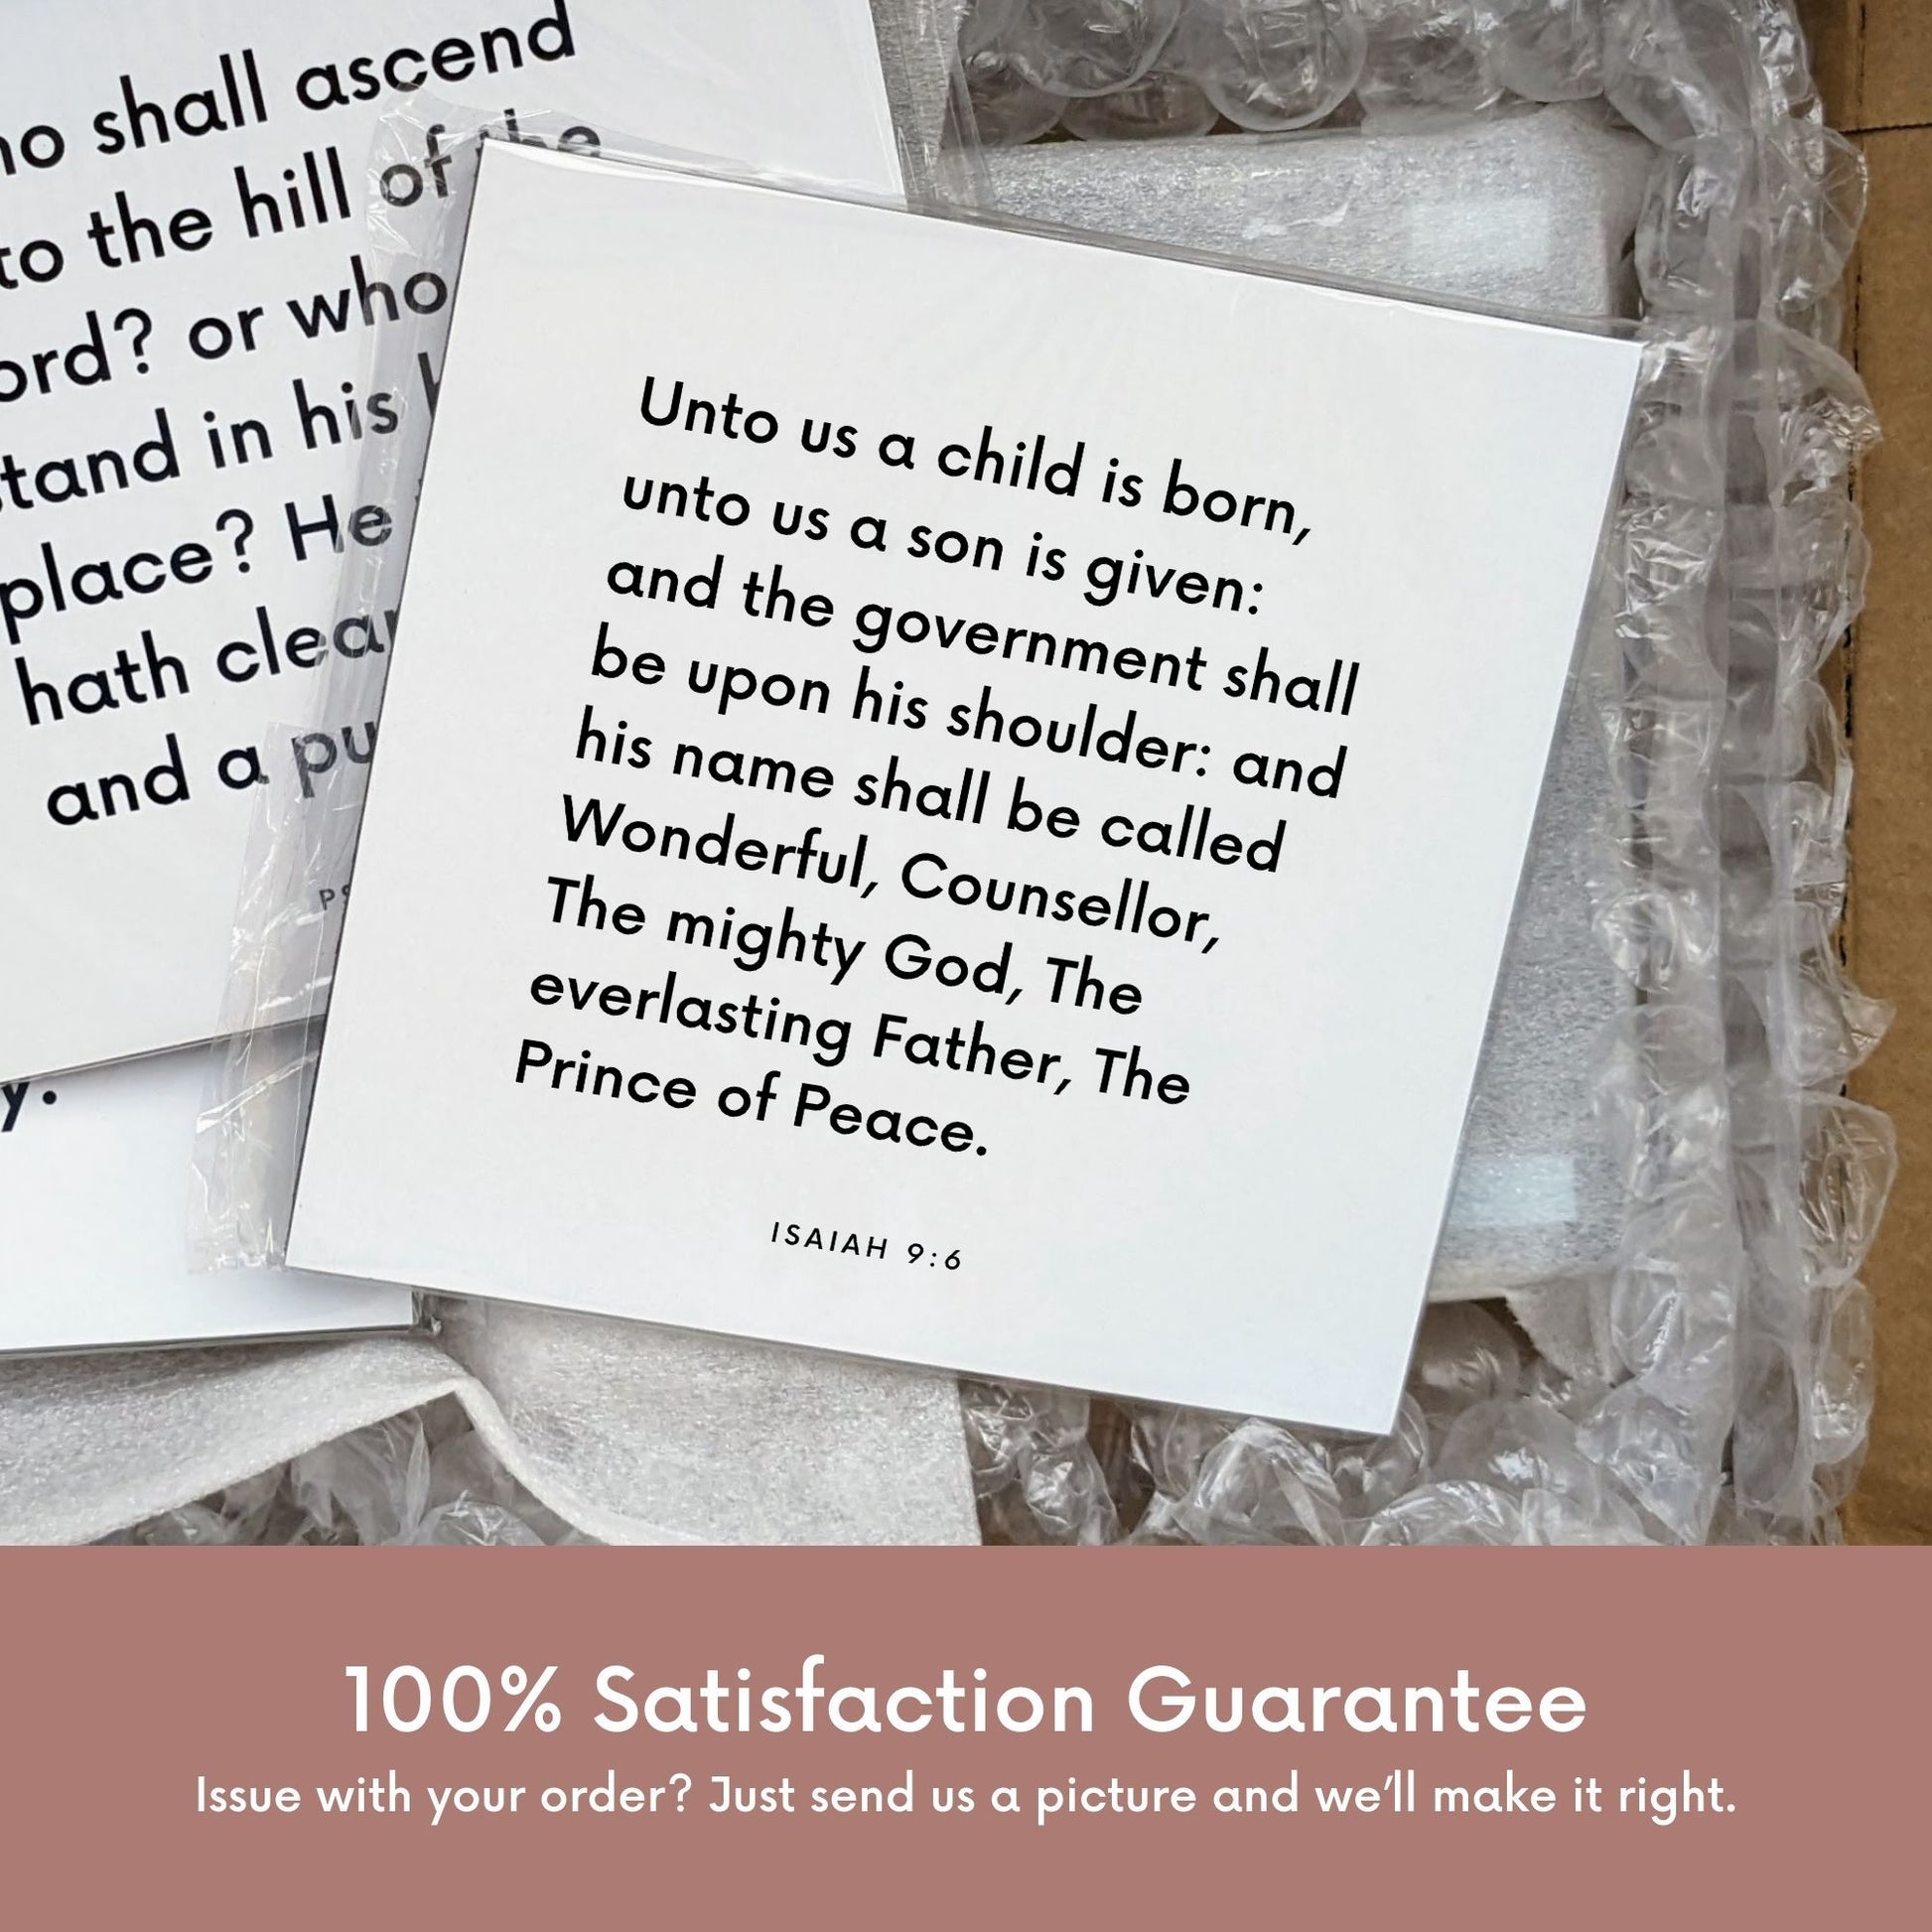 Shipping materials for scripture tile of Isaiah 9:6 - "Unto us a child is born, unto us a son is given"